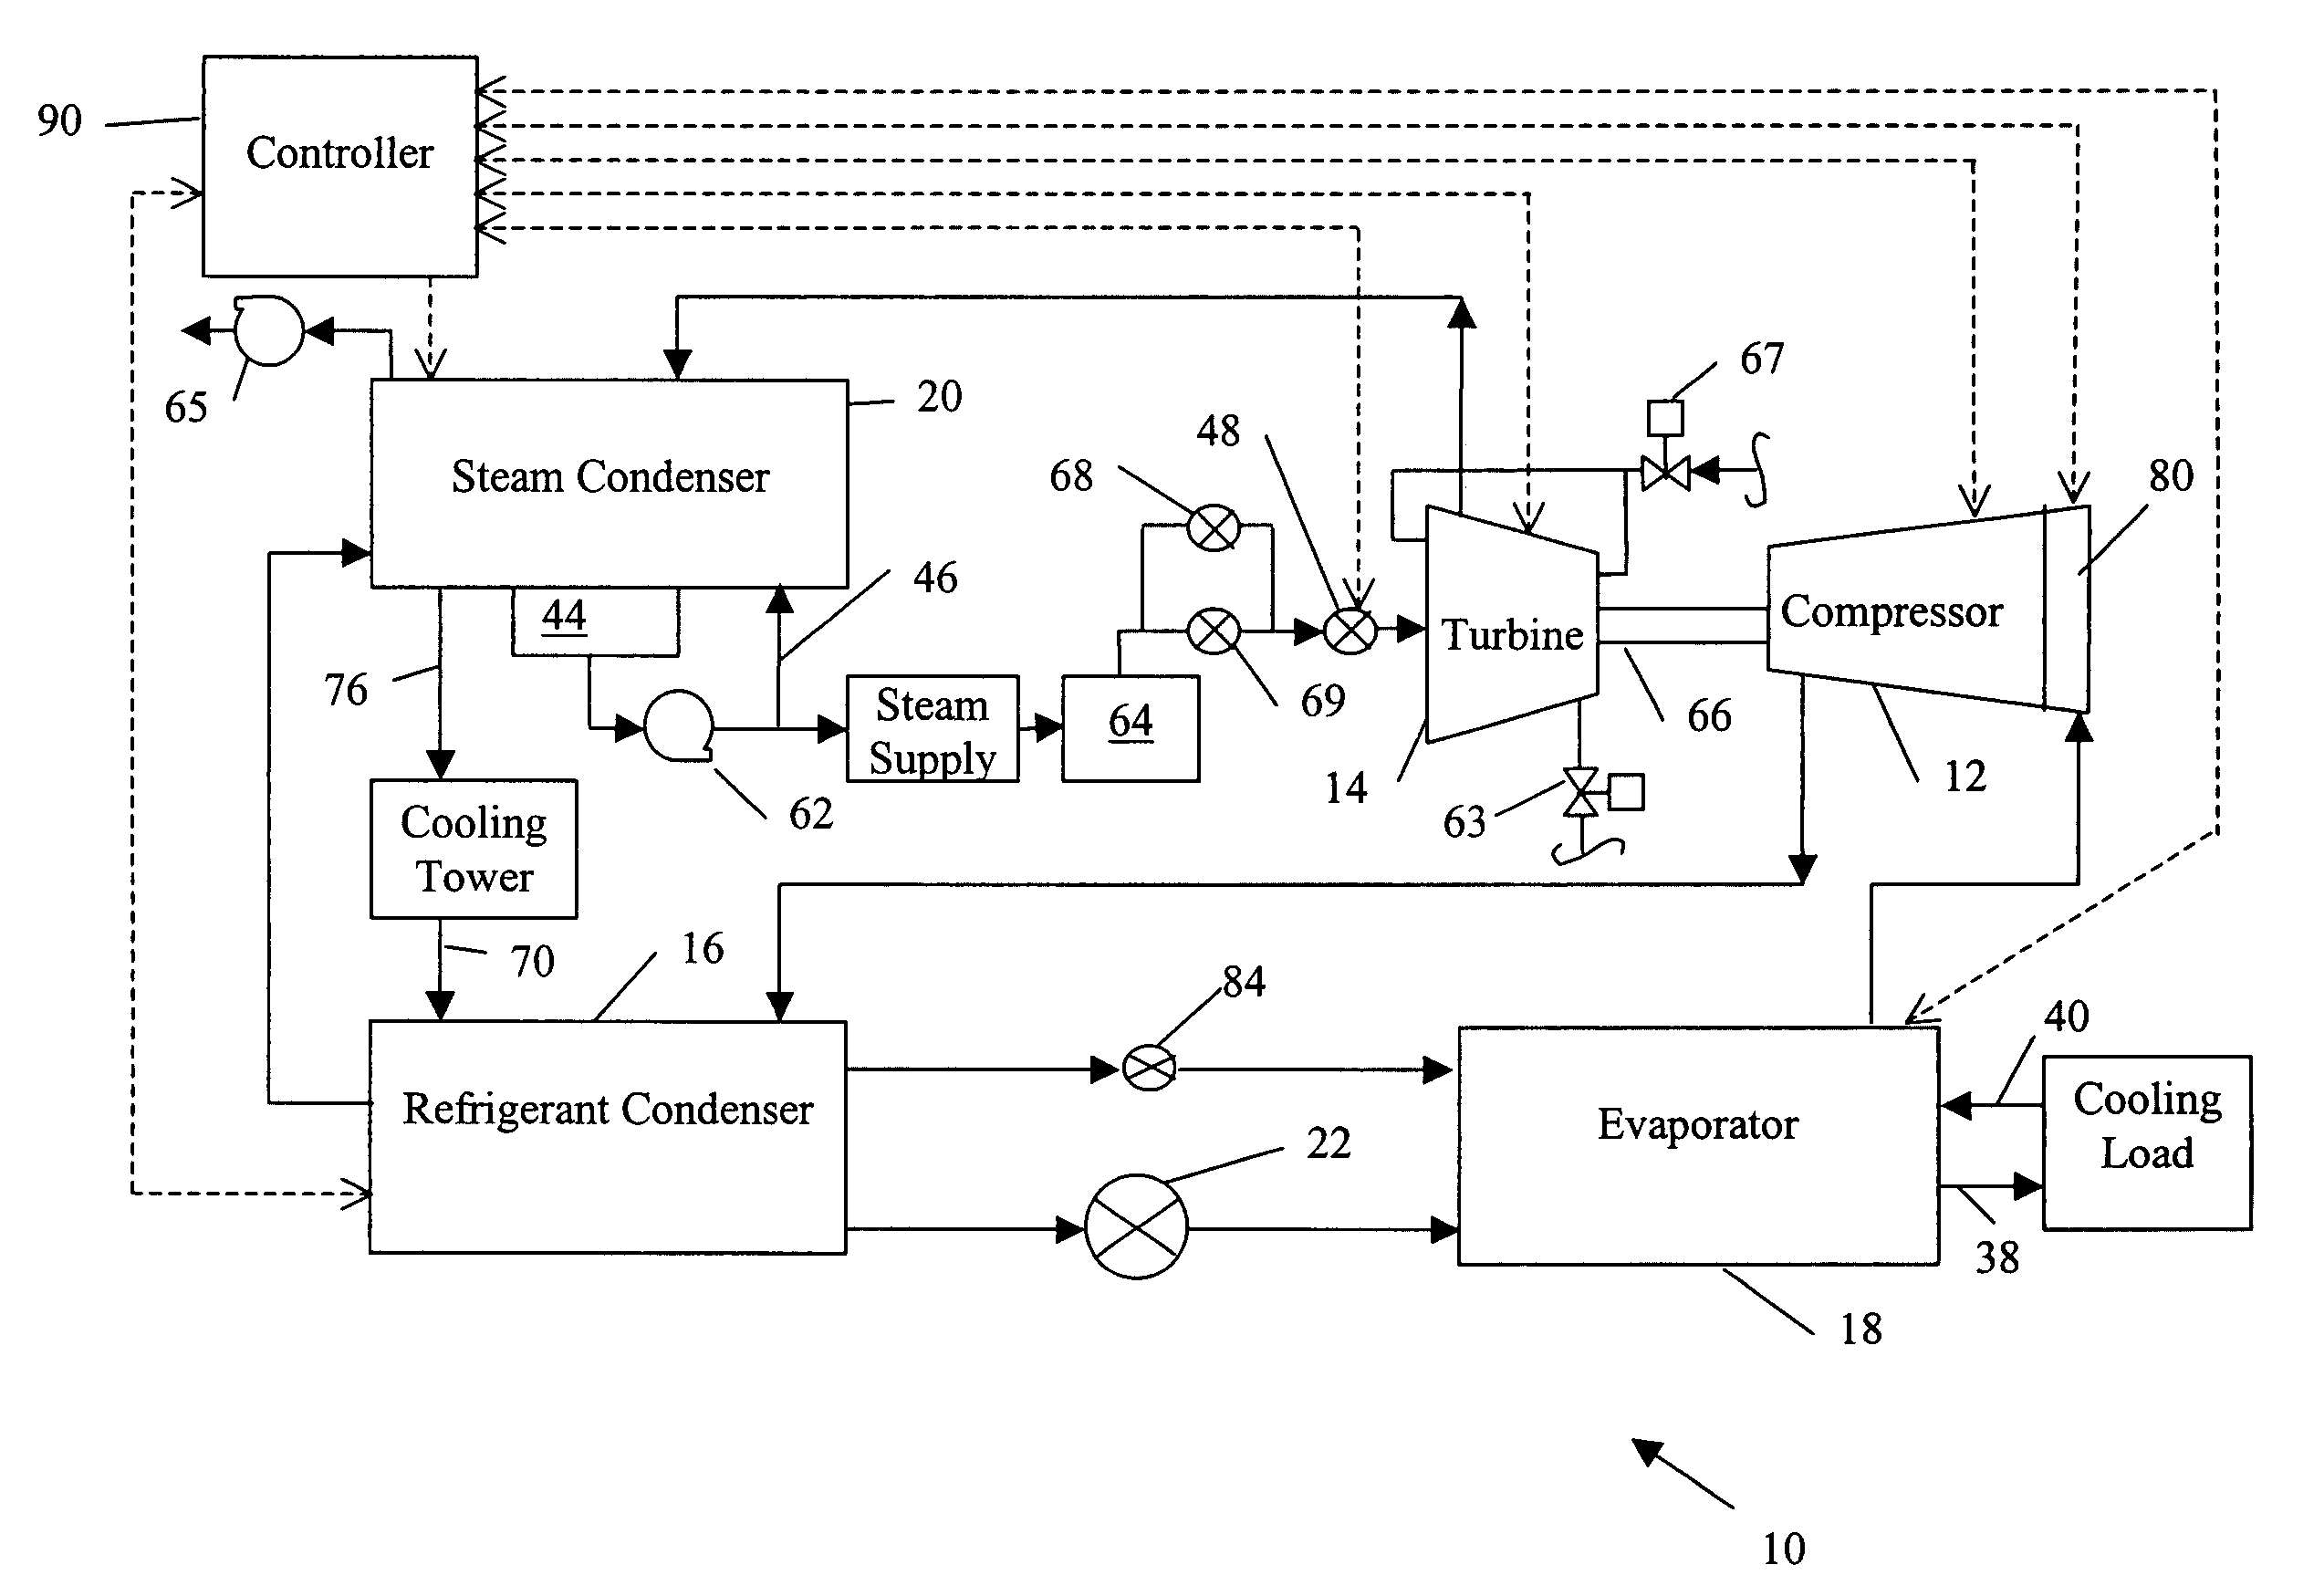 Automatic start/stop sequencing controls for a steam turbine powered chiller unit